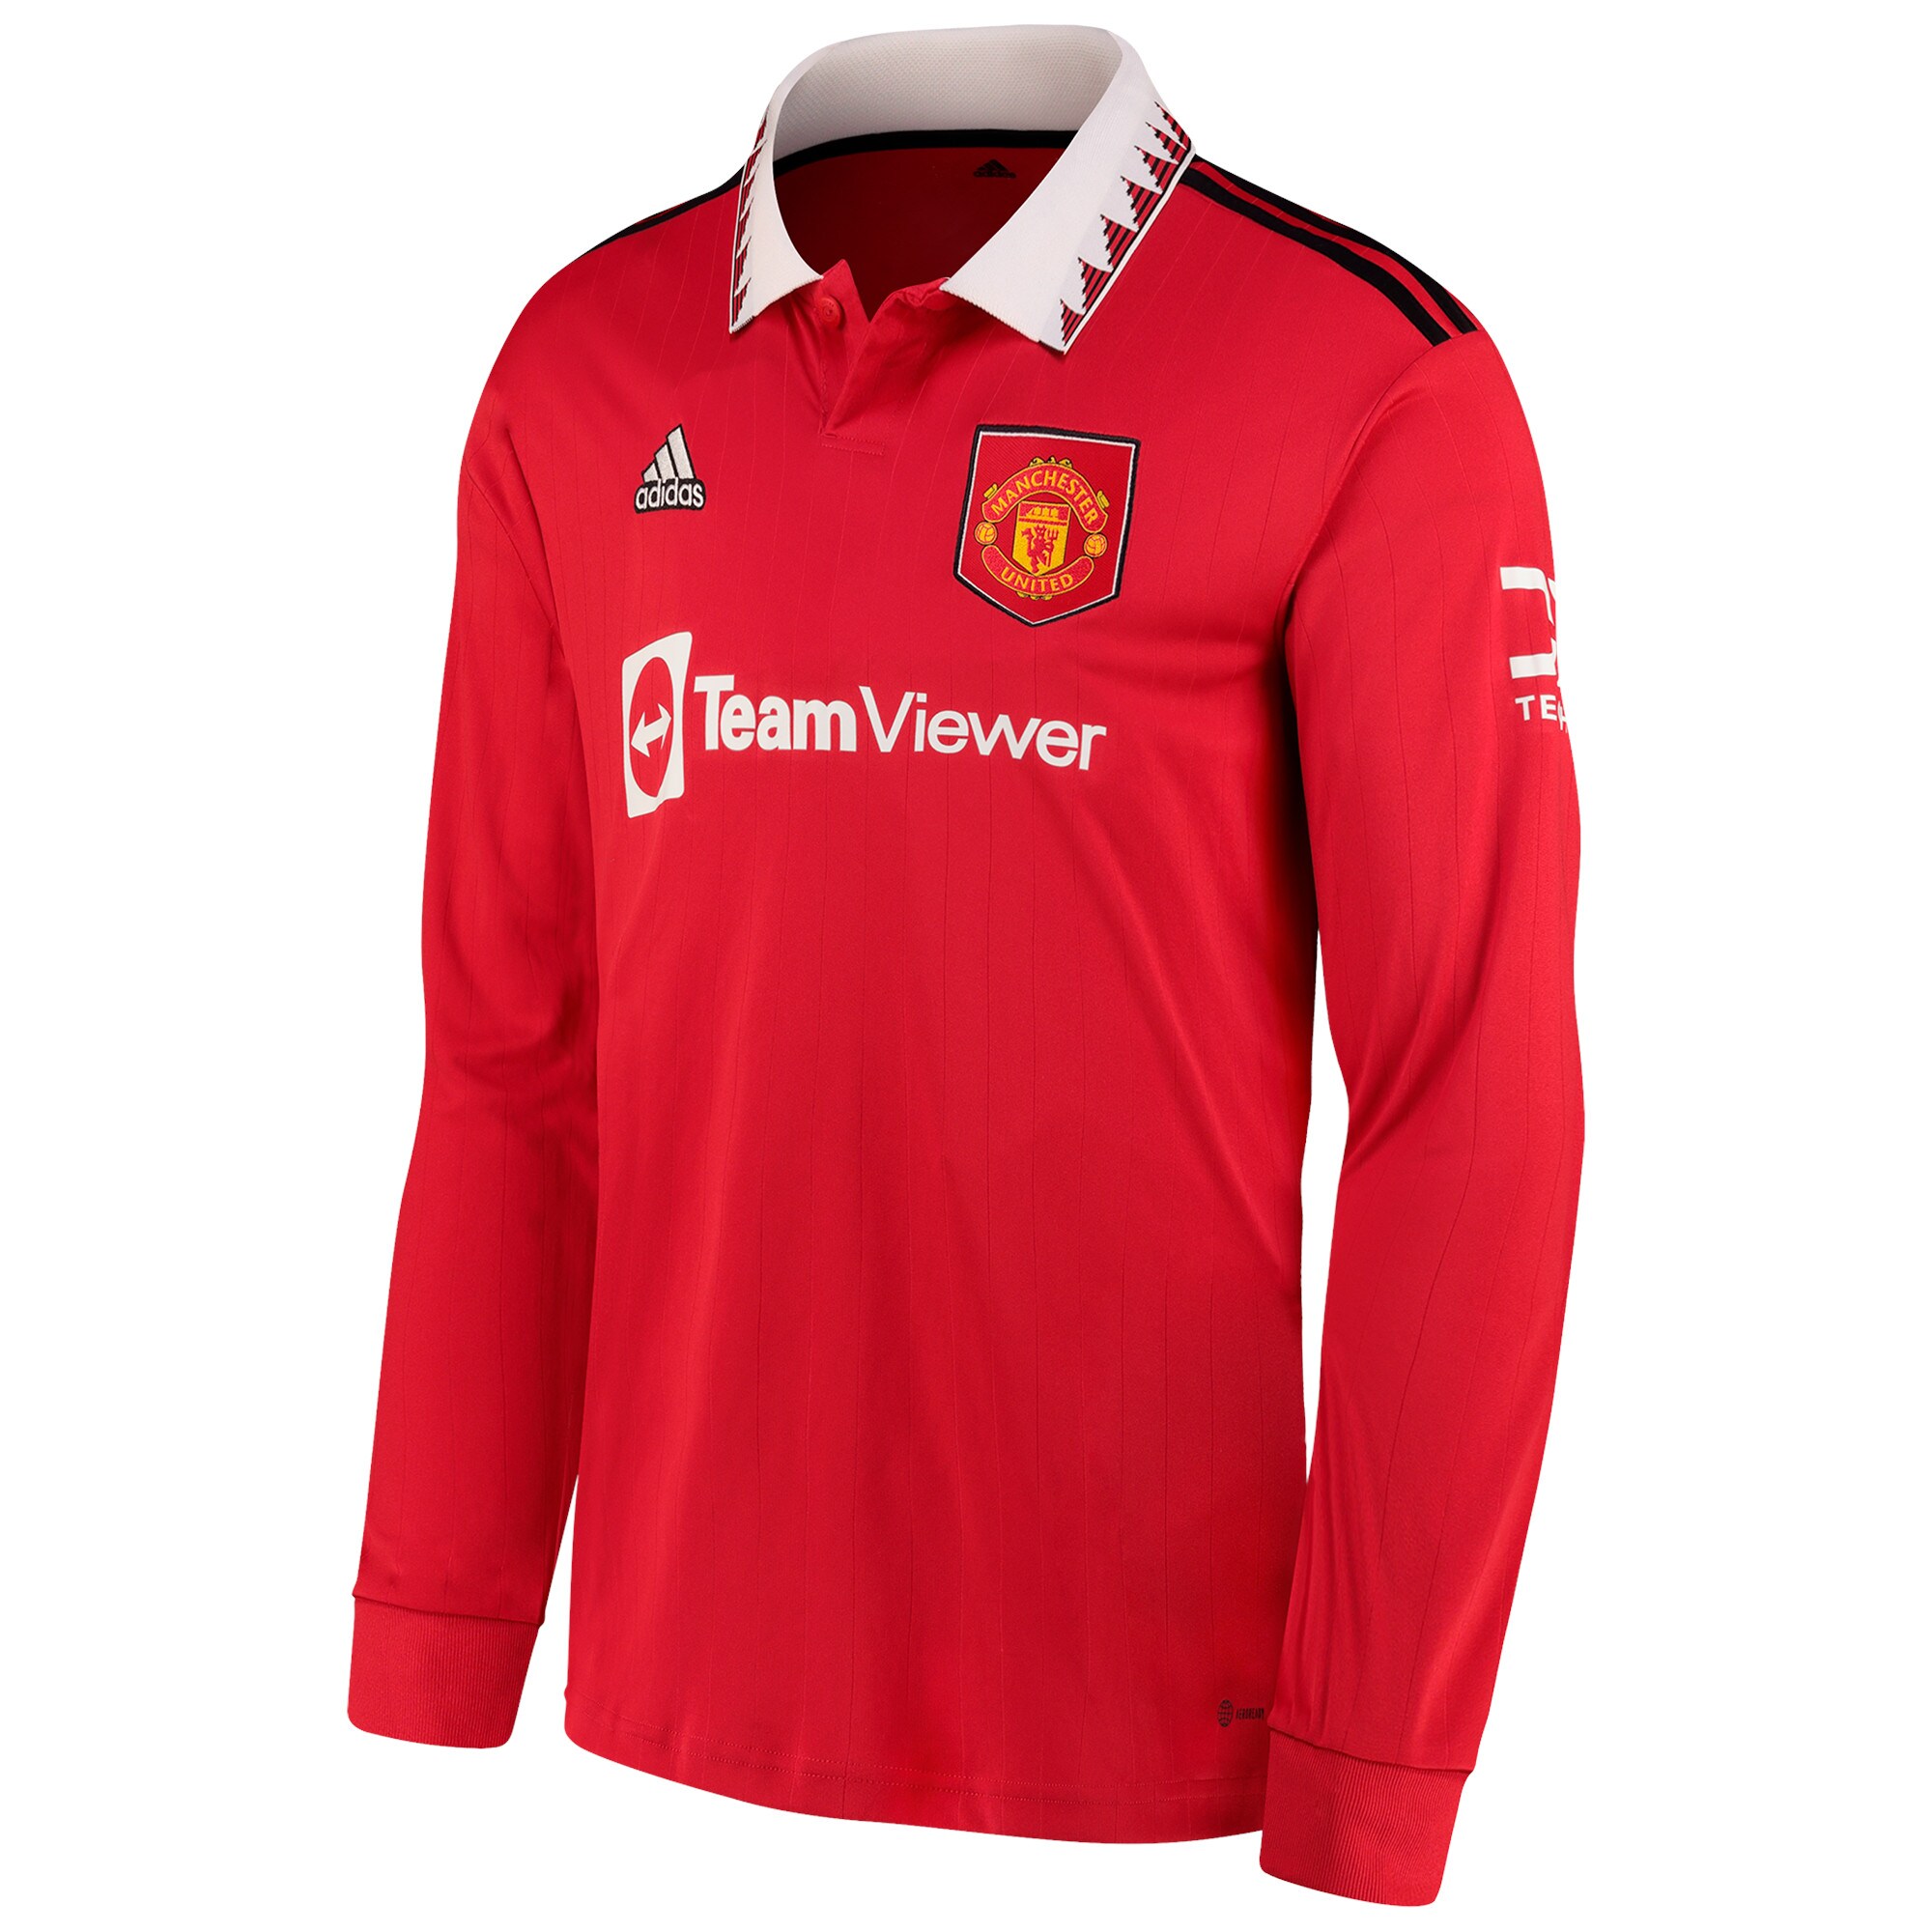 Manchester United Cup Home Shirt 2022-23 - Long Sleeve with Antony 21 printing